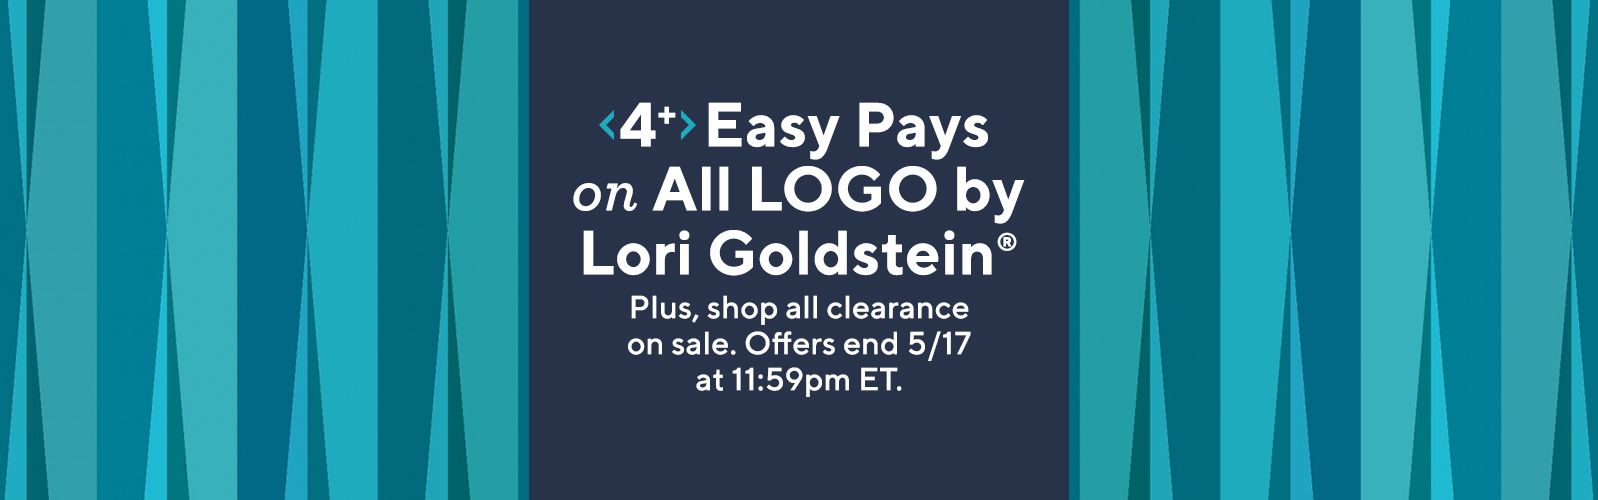 4+ Easy Pays on All LOGO by Lori Goldstein® Plus, shop all clearance on sale. Offers end 5/17 at 11:59pm ET.